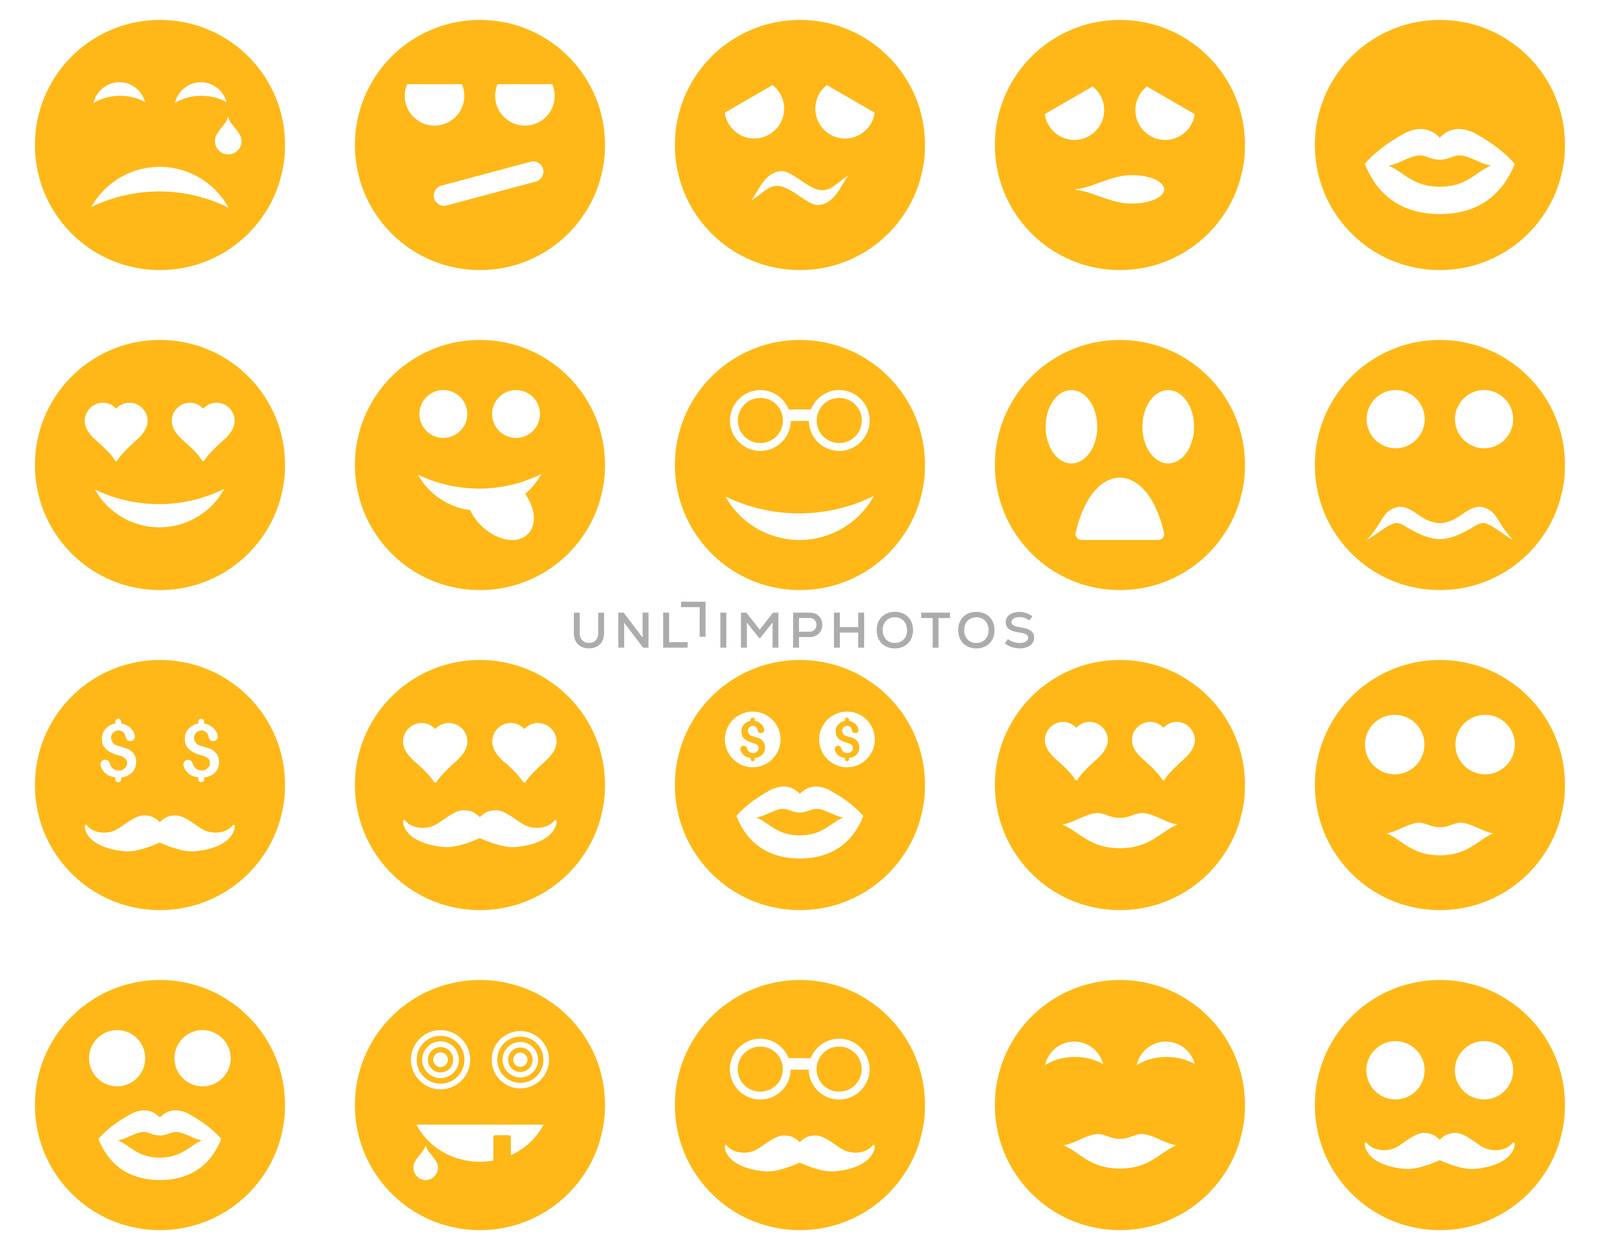 Smile and emotion icons. Glyph set style is flat images, yellow symbols, isolated on a white background.